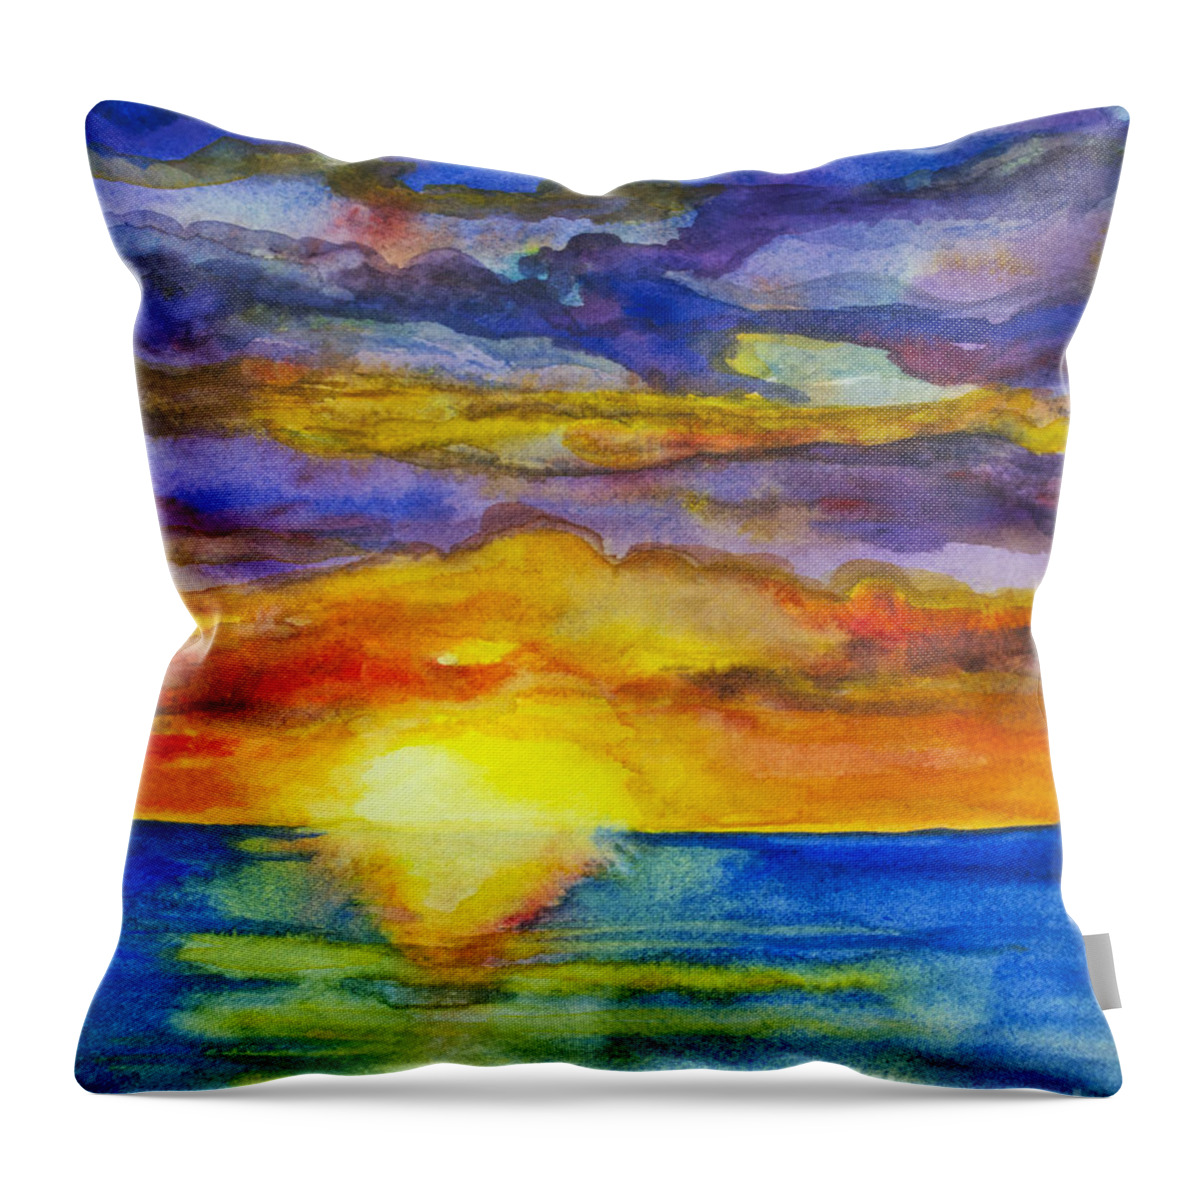 Seascape Throw Pillow featuring the painting Sunset 1 by Suzette Kallen